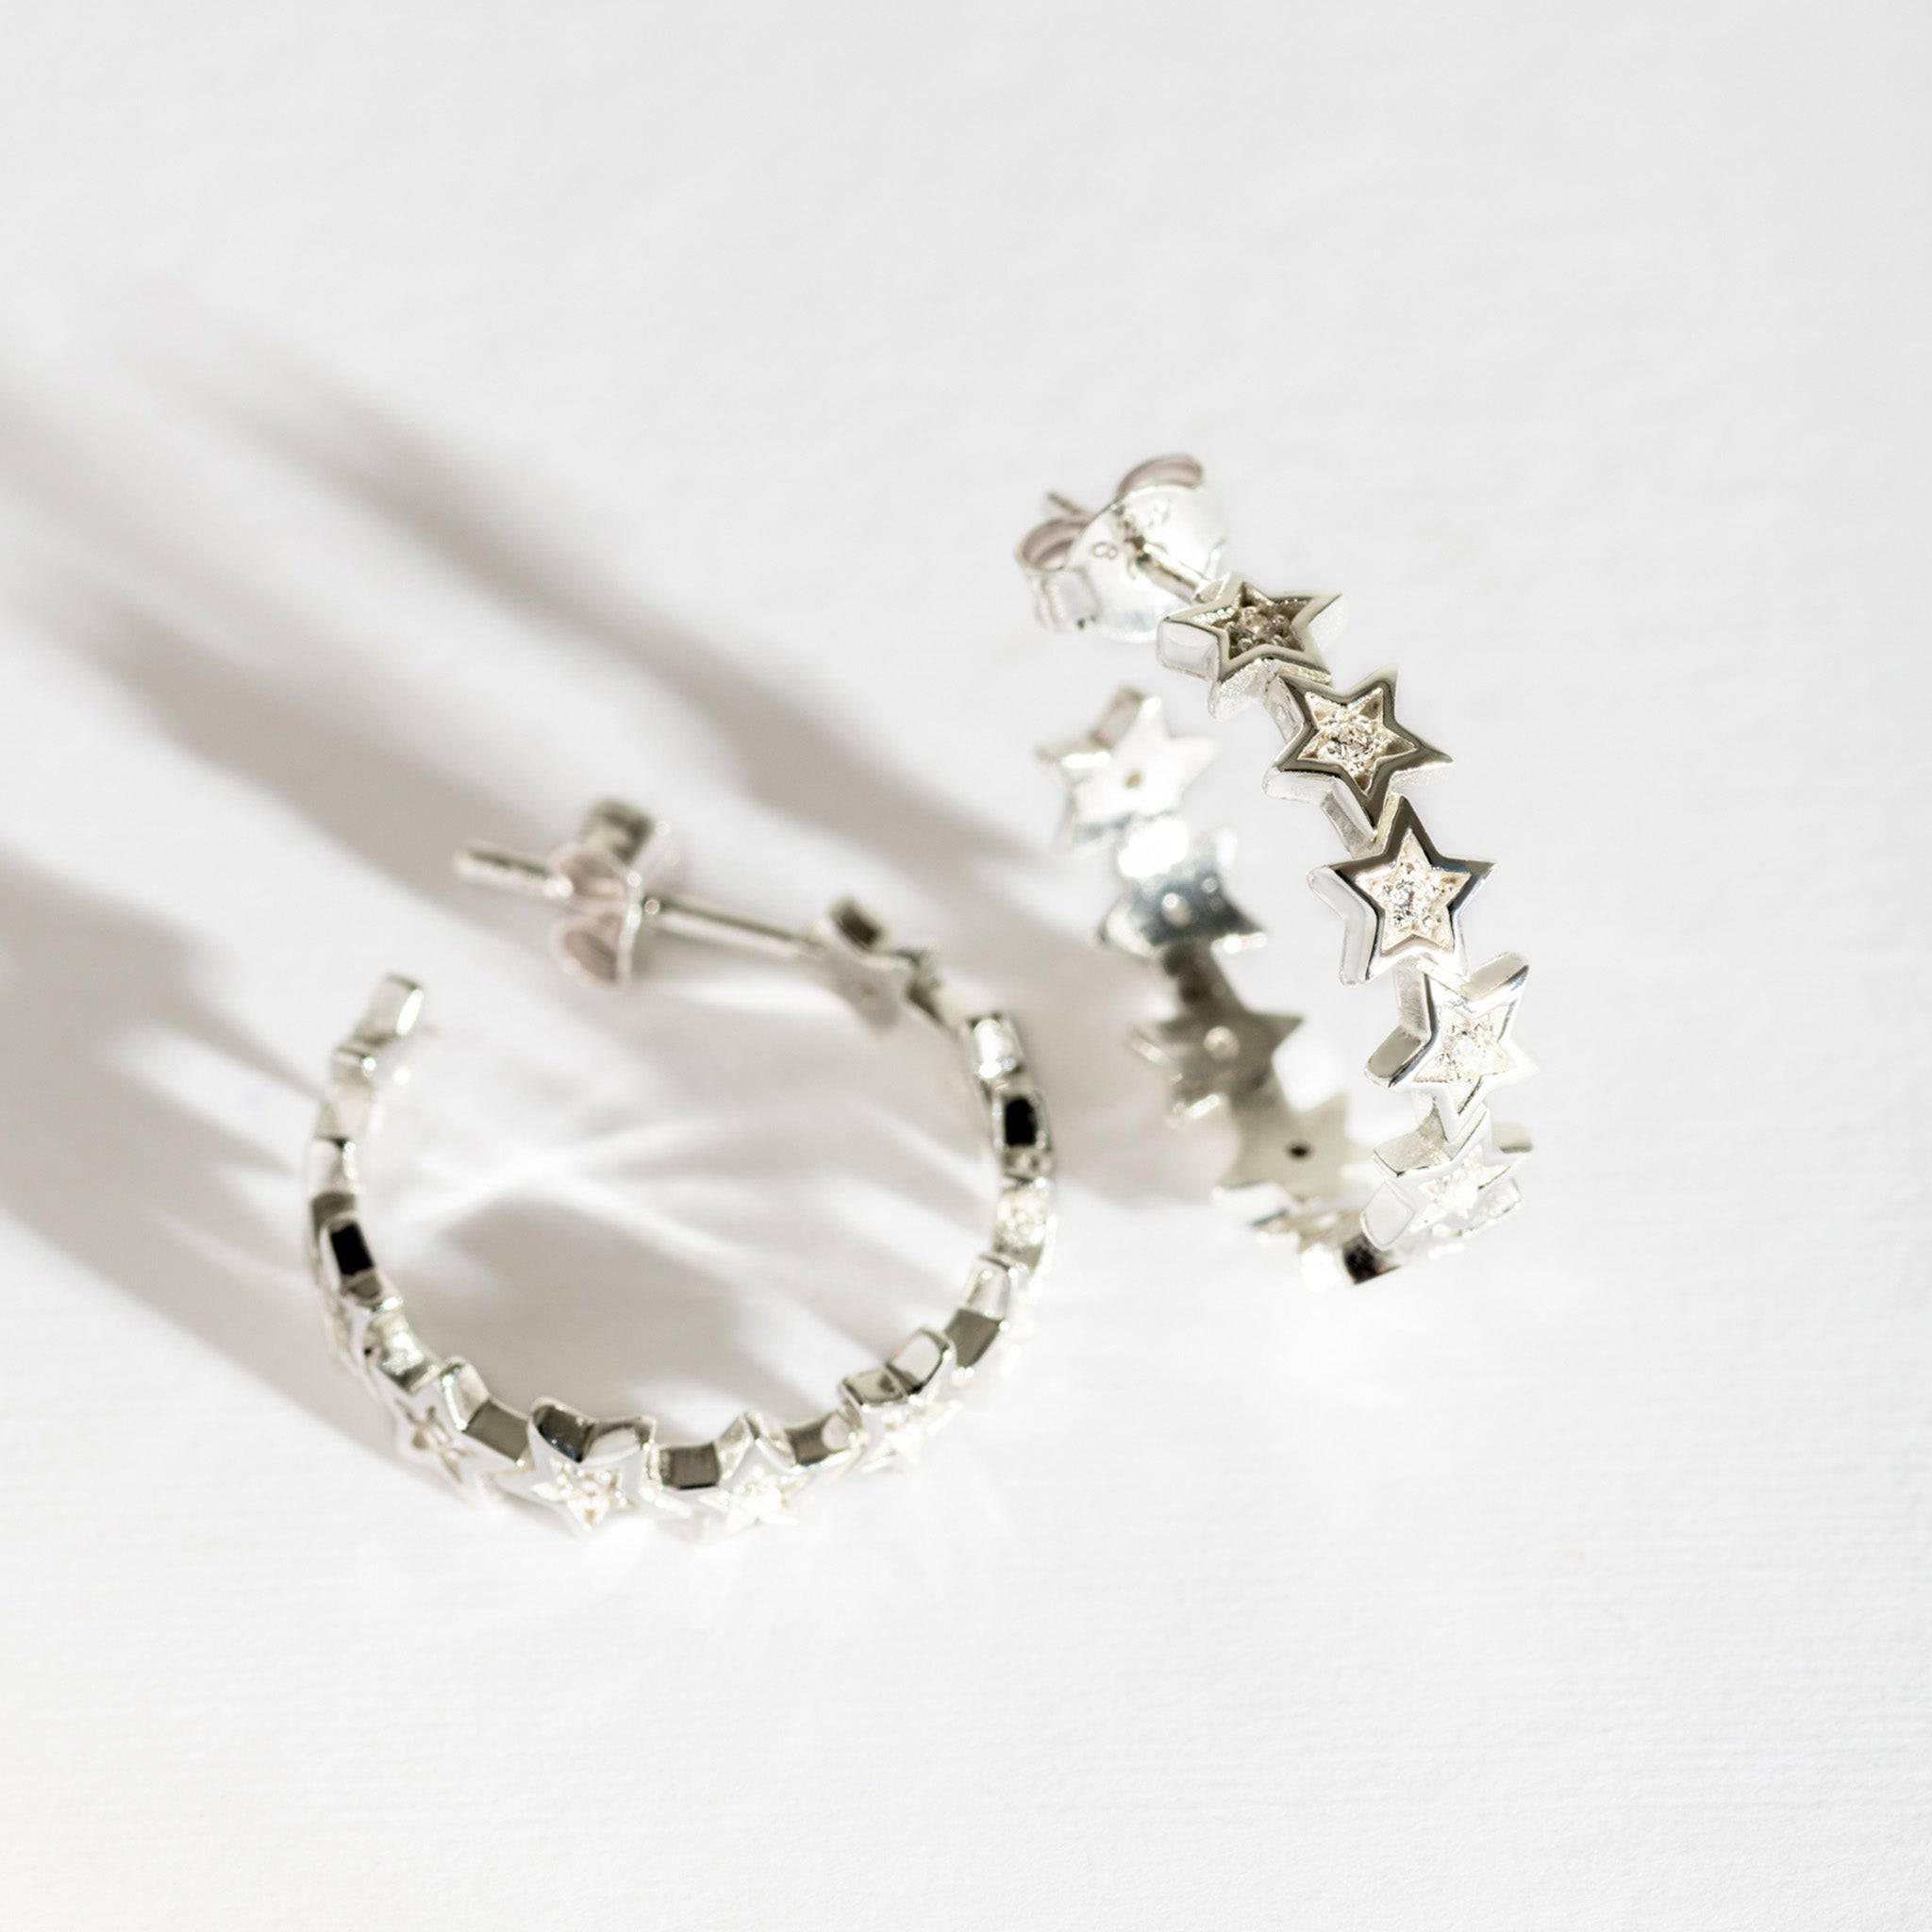 Recycled silver & gold jewellery — De Vree